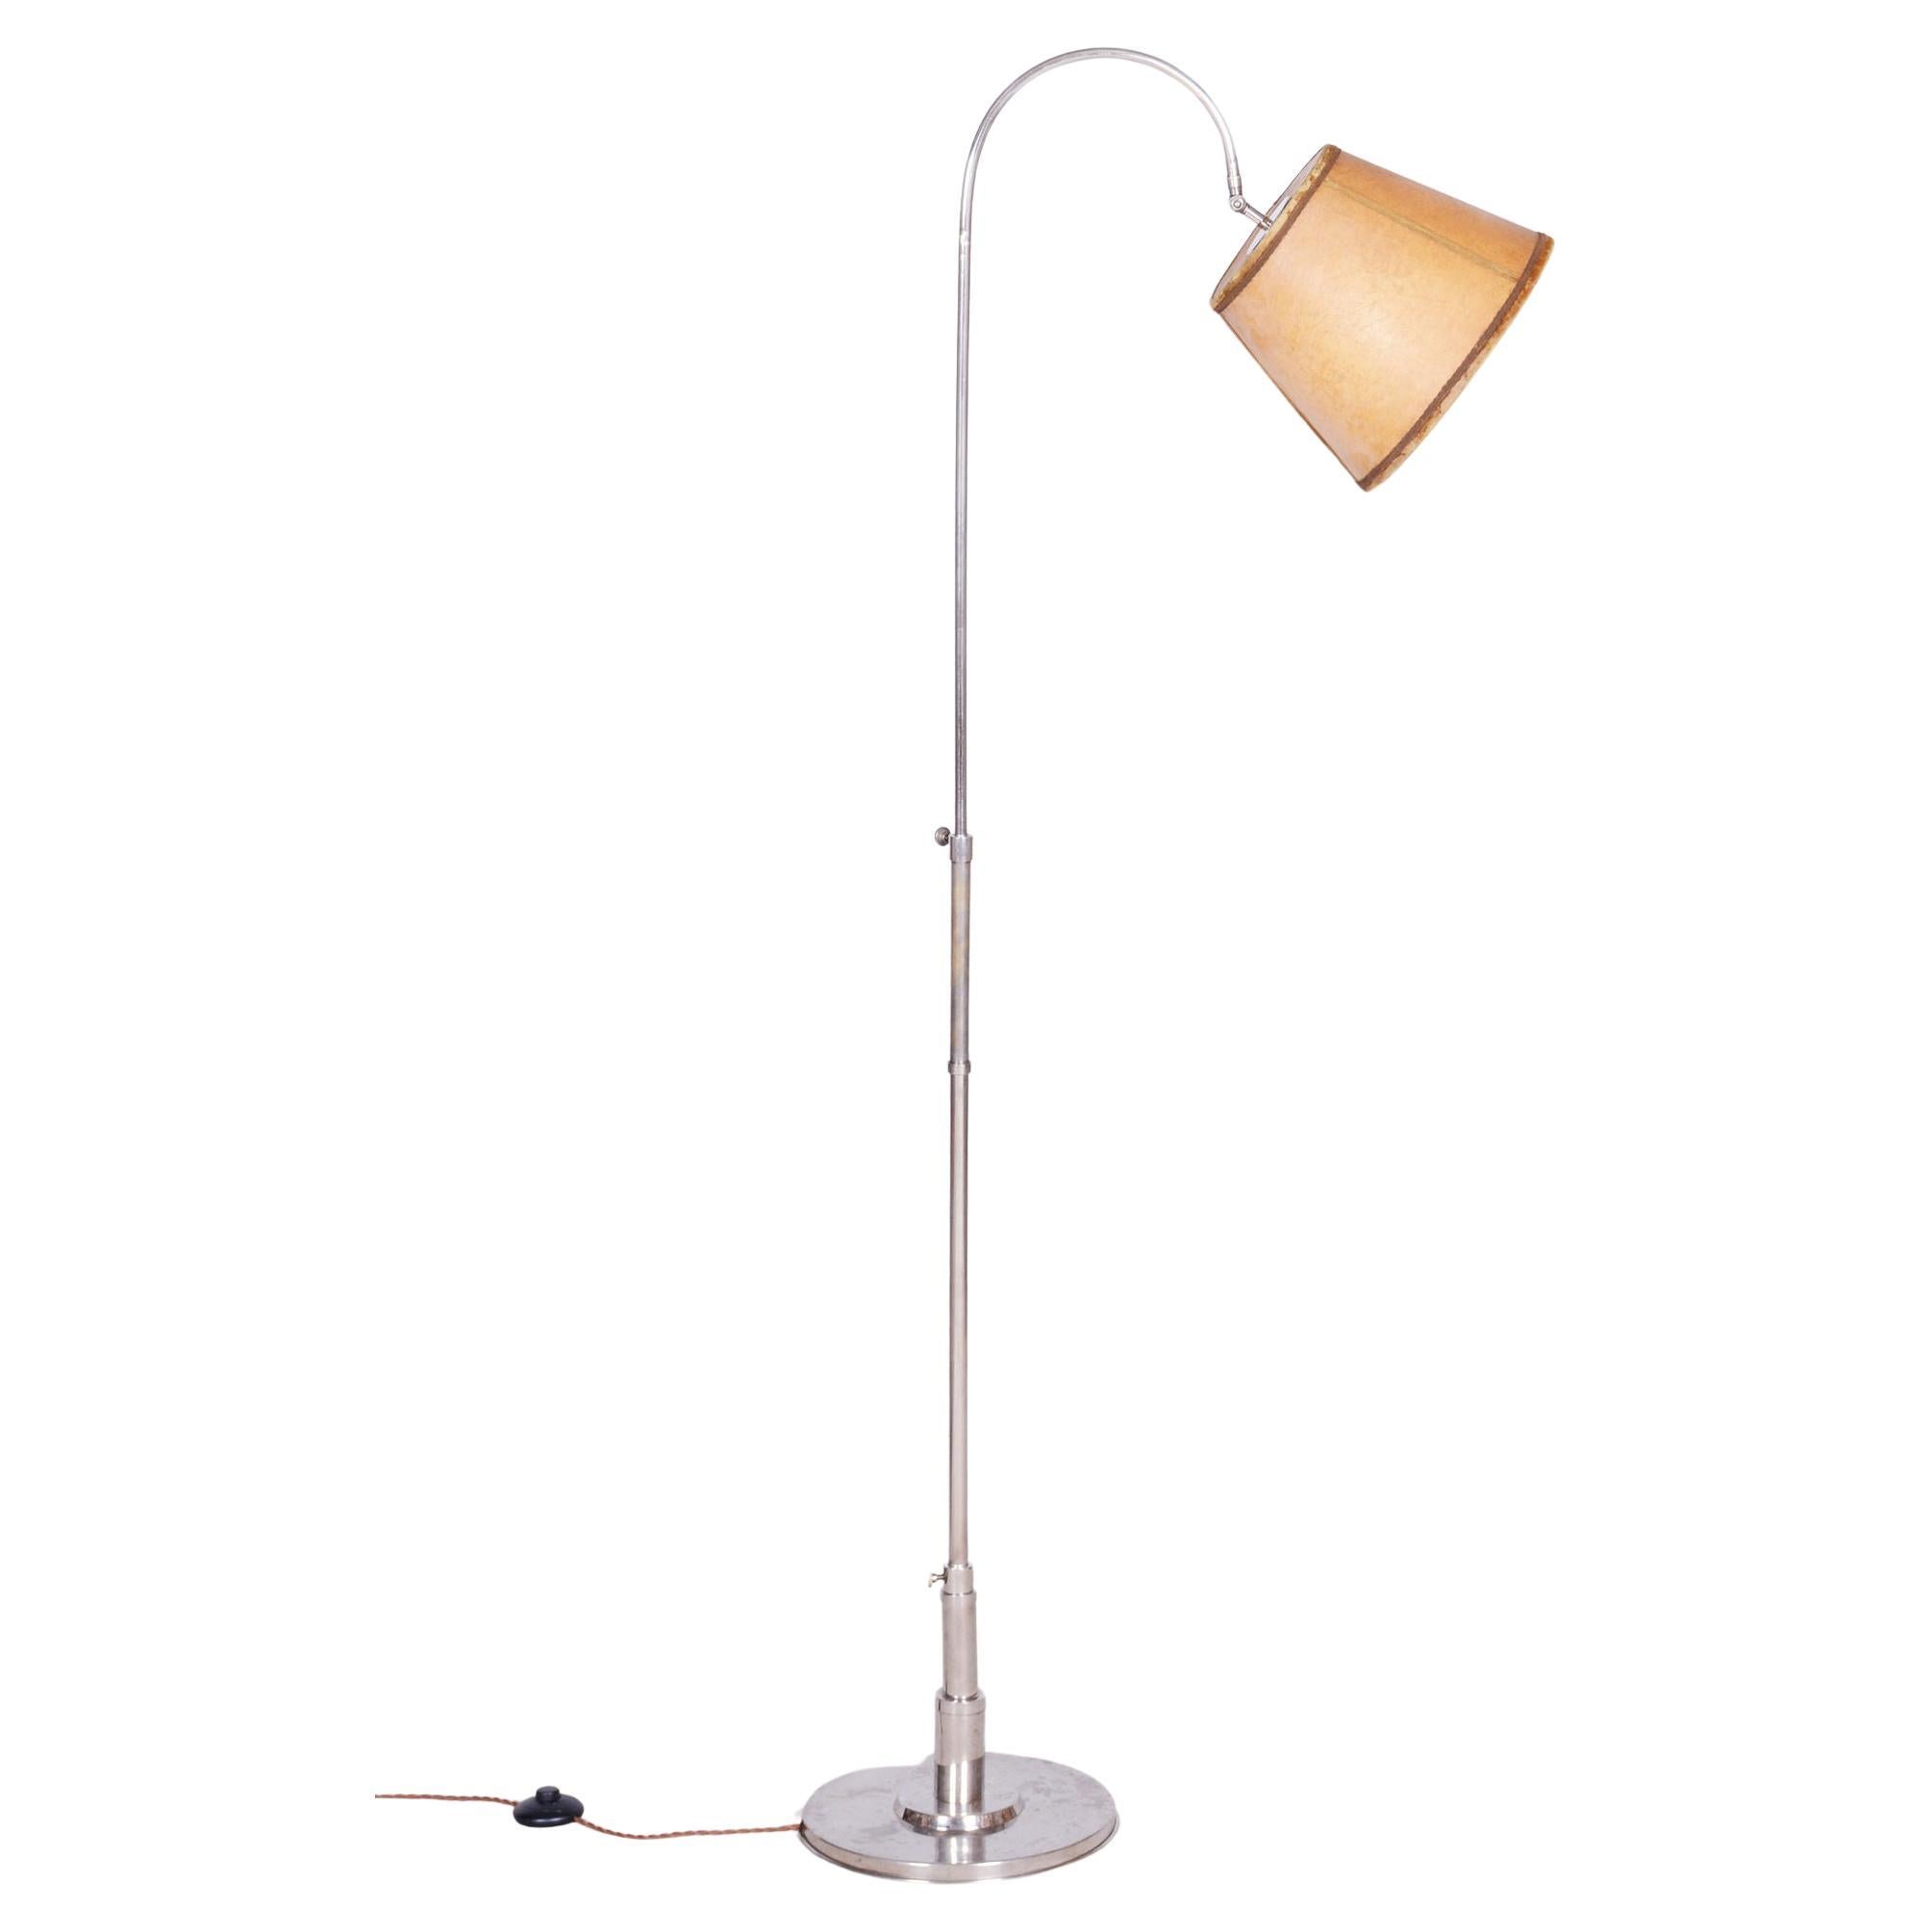 Restored Czech Bauhaus Floor Lamp, Nickel-Plated Steel, Parchment Shade, 1920s For Sale